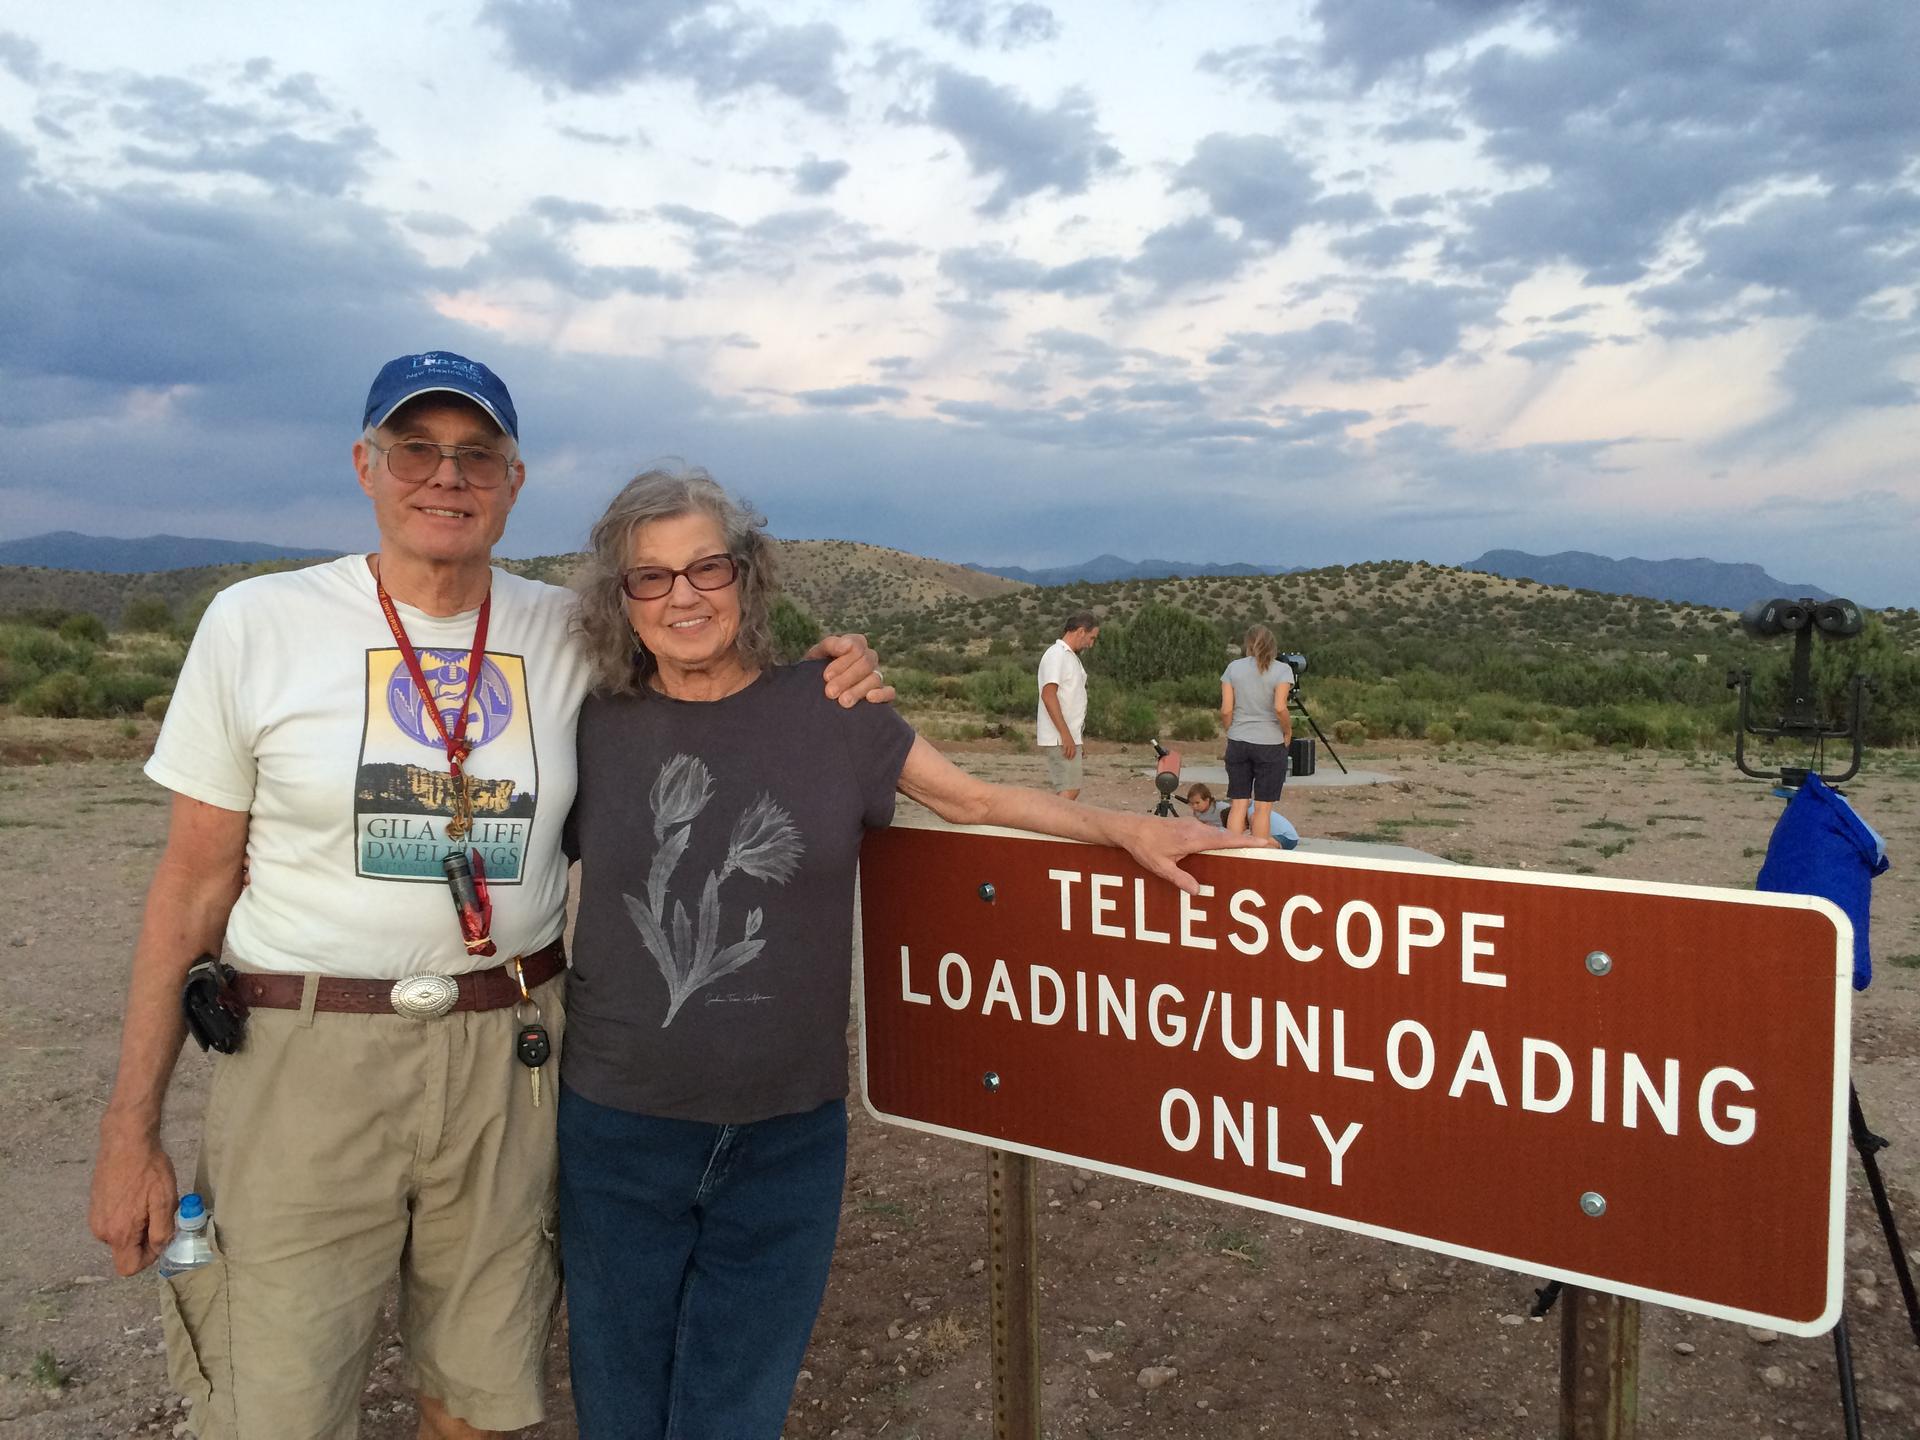 Astronomer Al Grauer and his wife Annie were instrumental in getting a dark sky sanctuary designation for the Cosmic Campground in New Mexico. The recognition came from the International Dark Sky Association. 